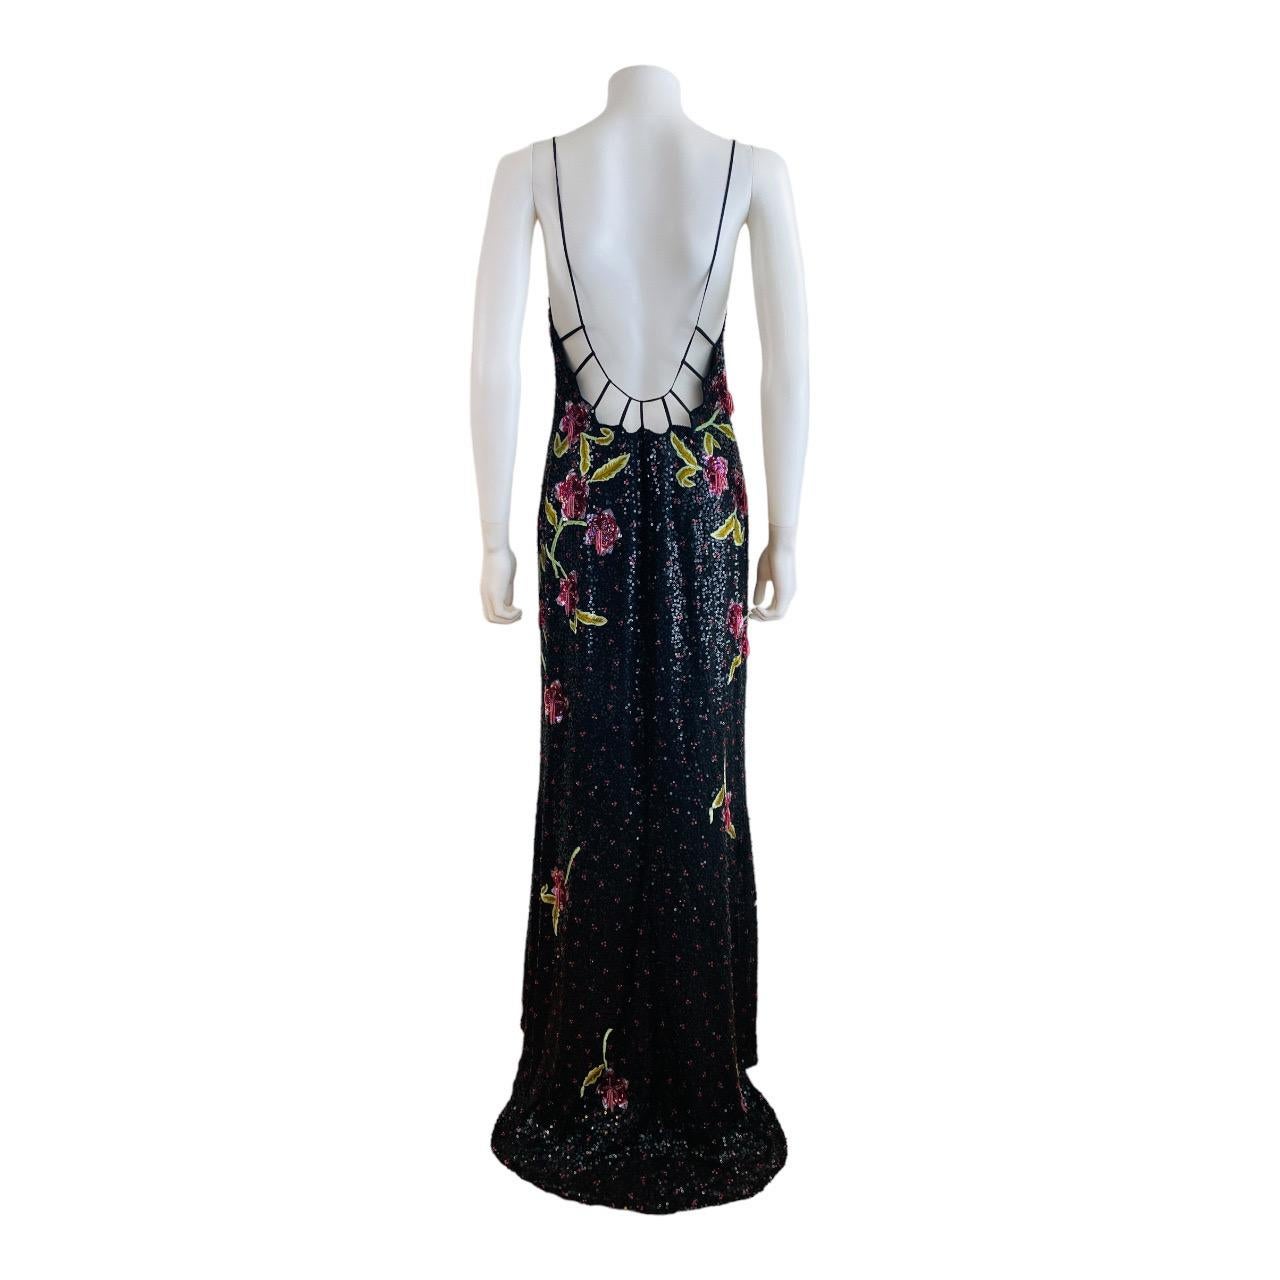 Vintage 2002 Escada Hand Beaded Sequin Floral Maxi Dress Gown Black Pink Flowers 4